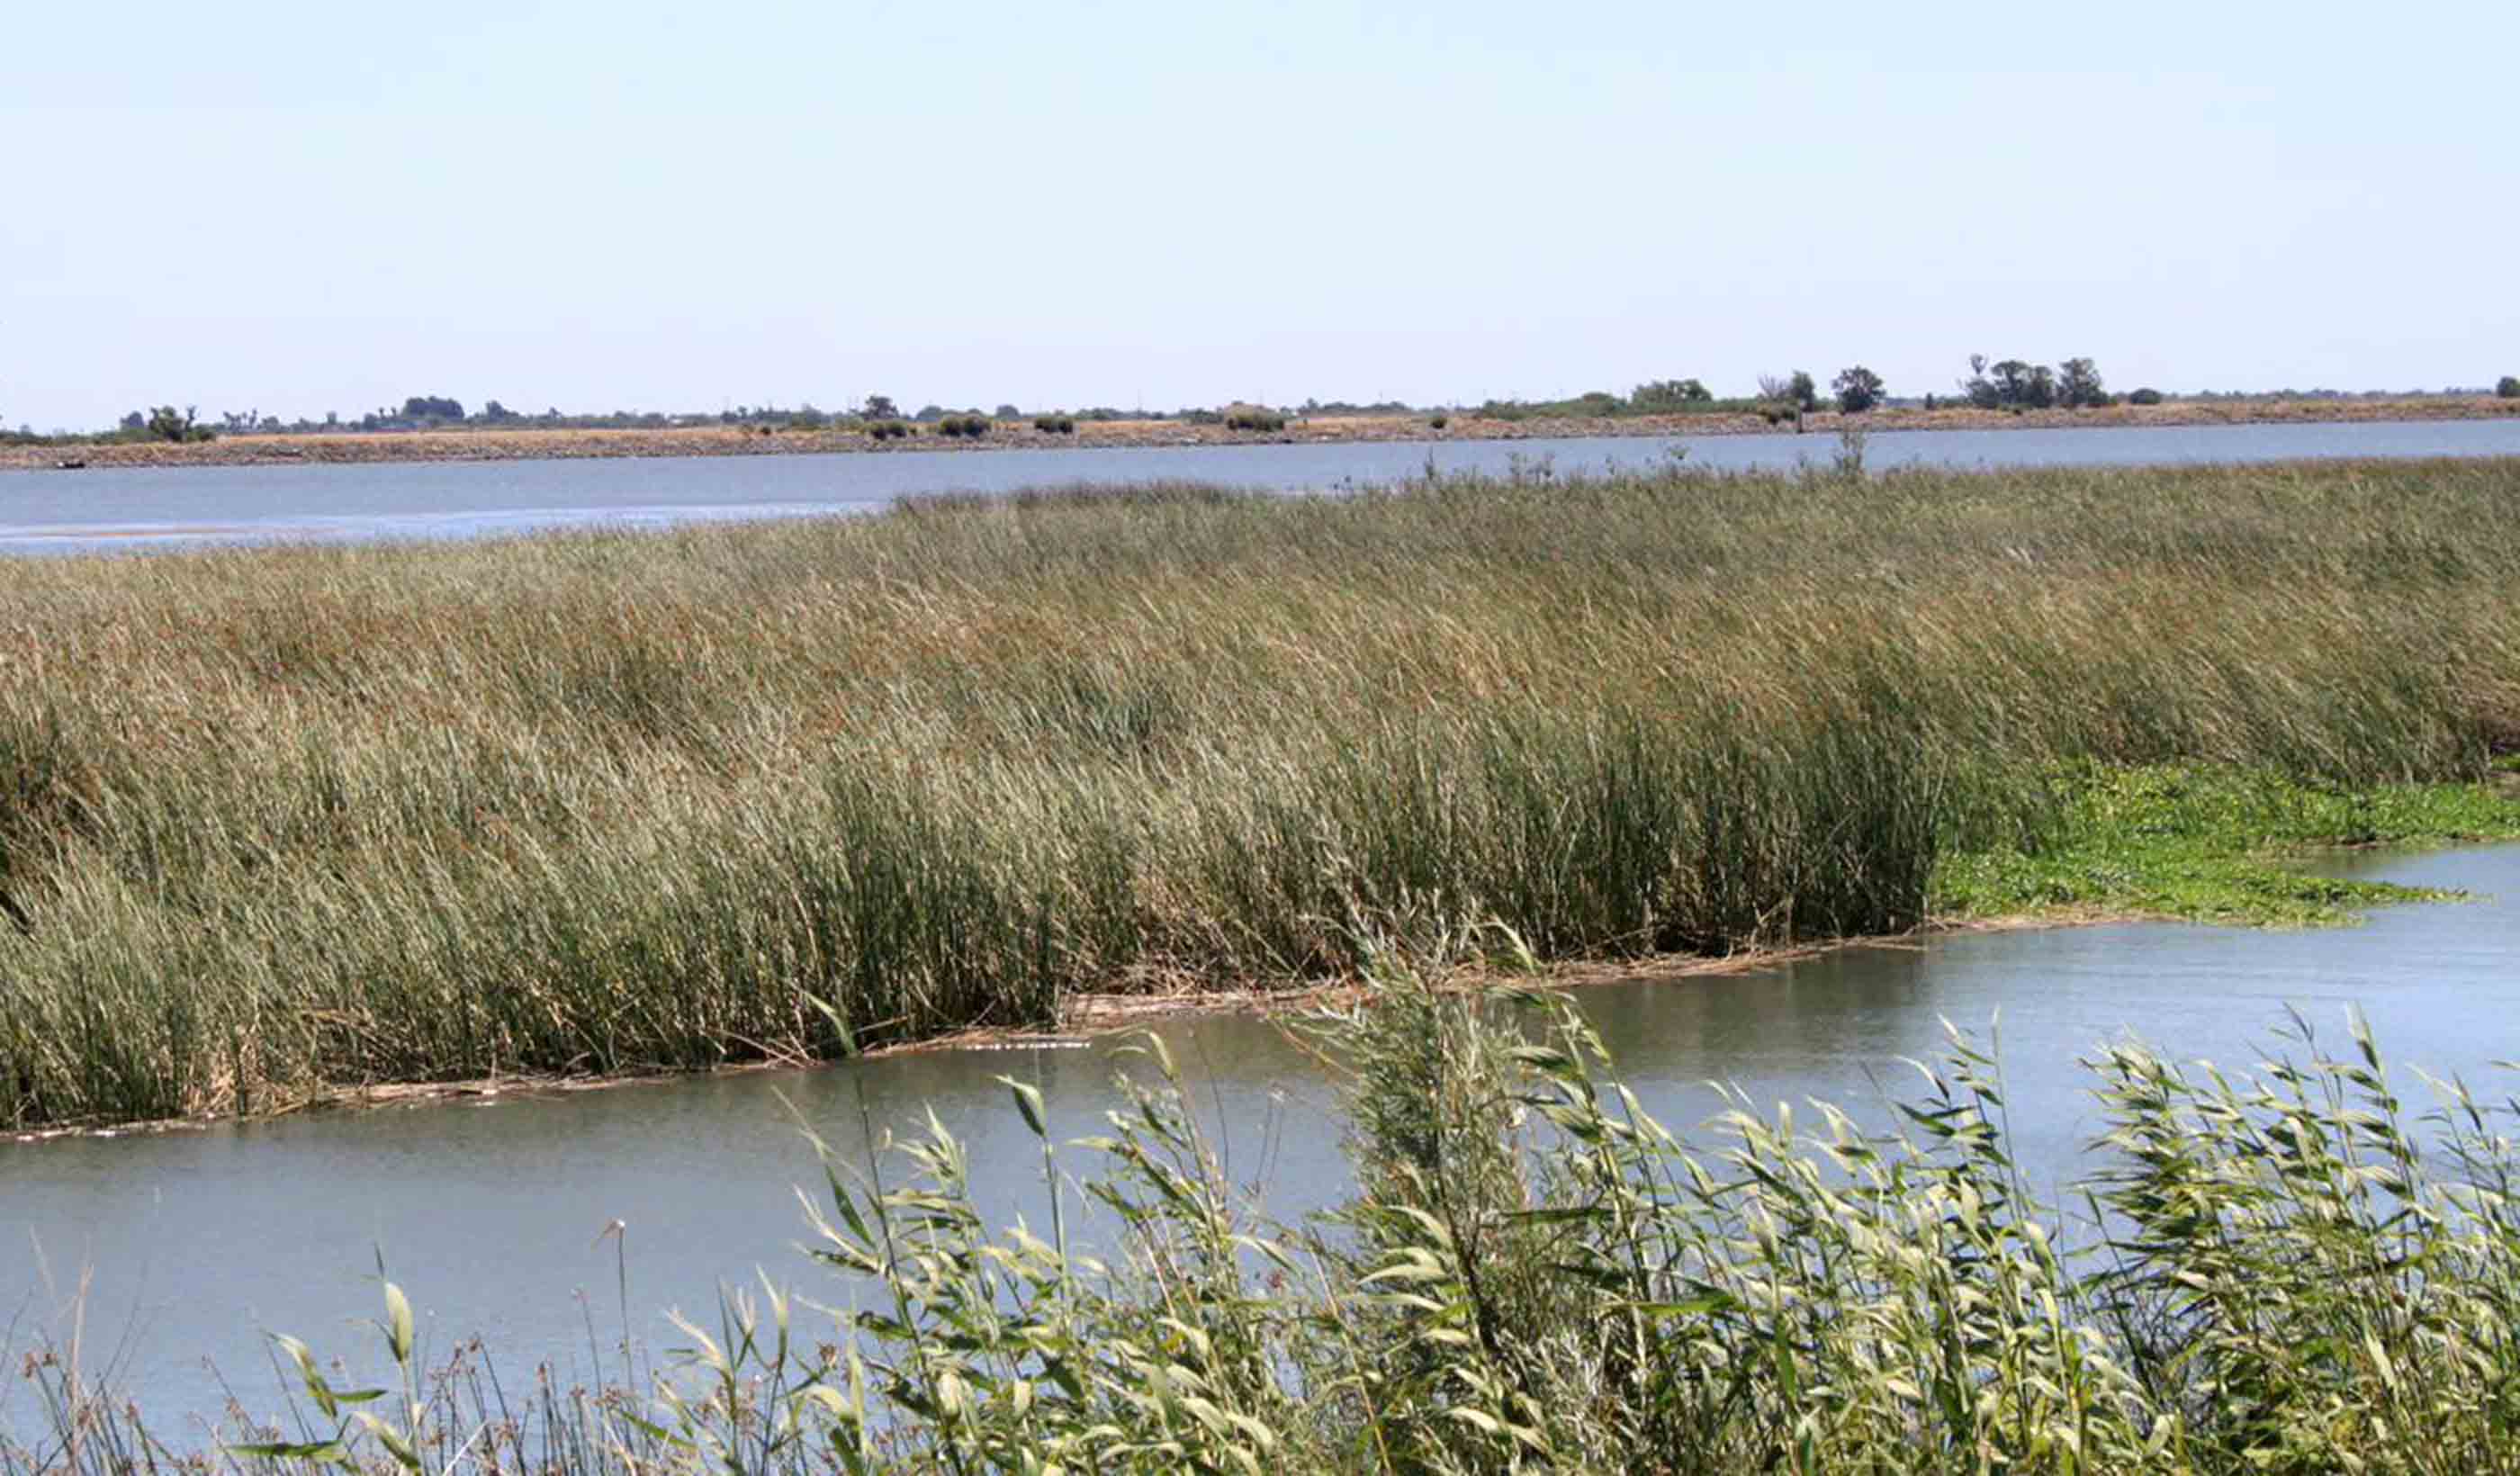 An in-depth look at the new leader of the Delta Stewardship Council as published in The Water Report